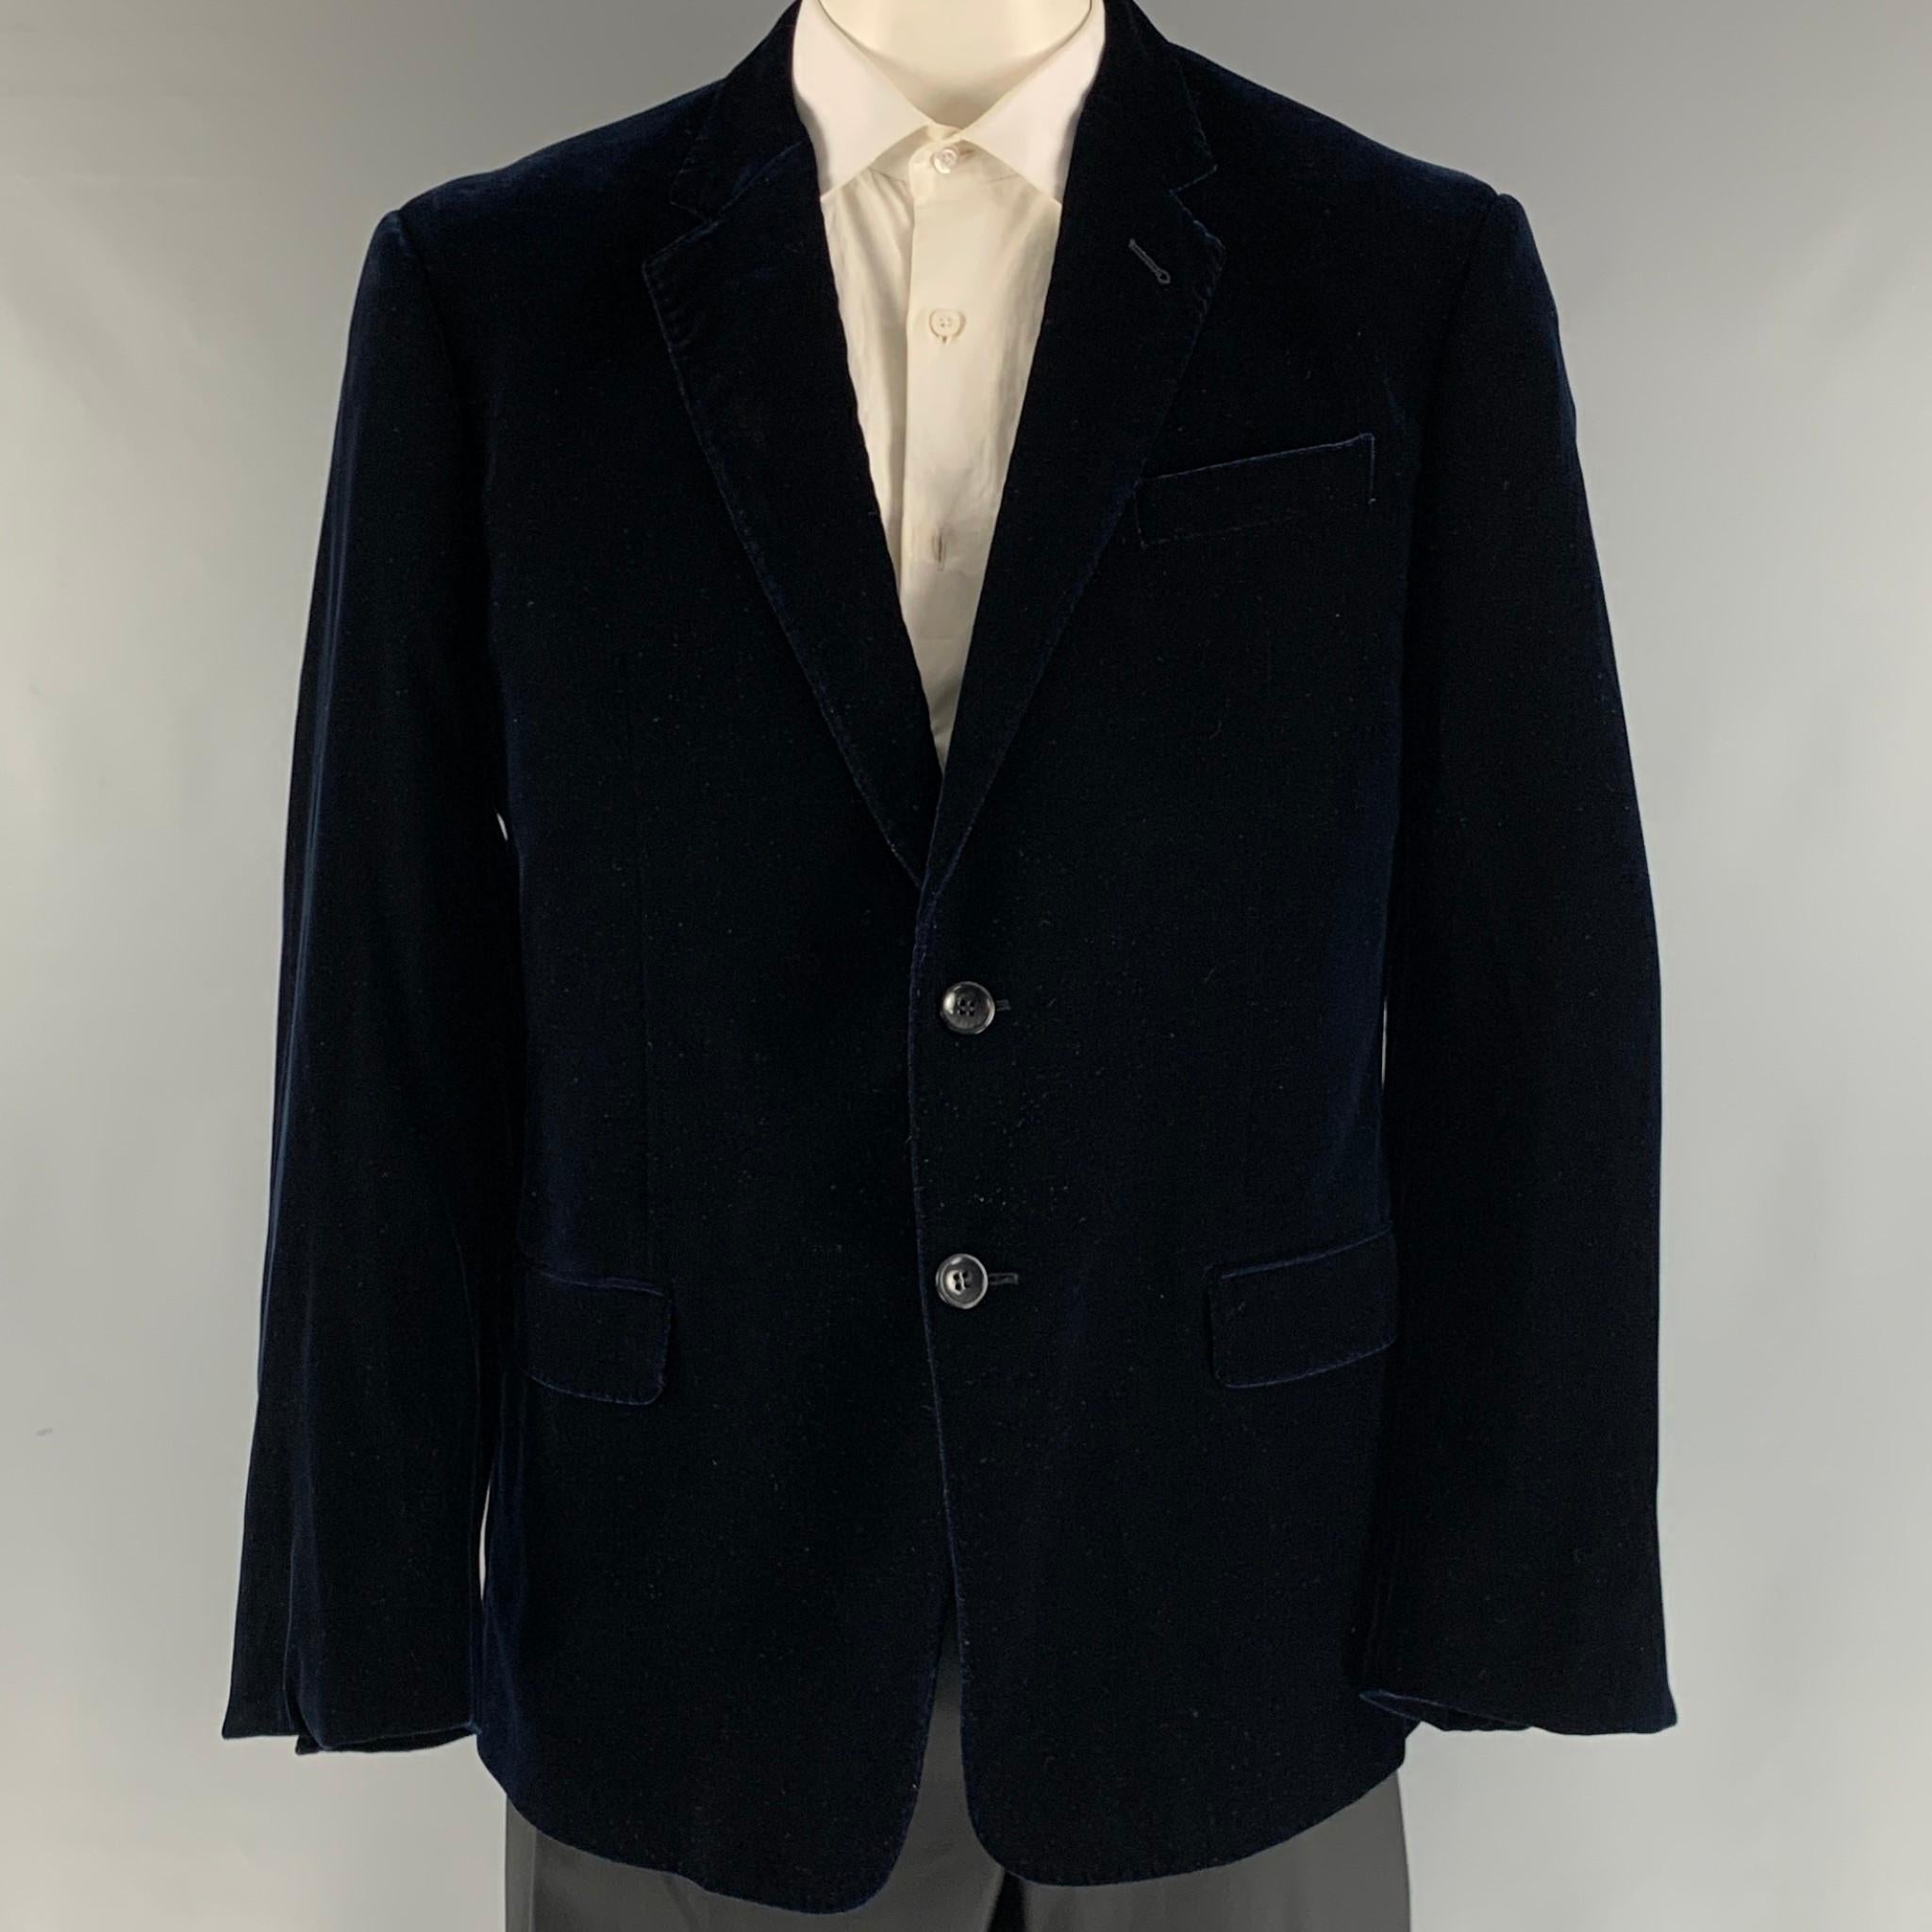 EMPORIO ARMANI 'Soft' sport coat comes in navy velvet viscose blend material with full liner featuring a notch lapel, patch pockets, and a two button closure. Made in Italy.

Excellent Pre-Owned Condition.
Marked: 56R

Measurements:

Shoulder: 20